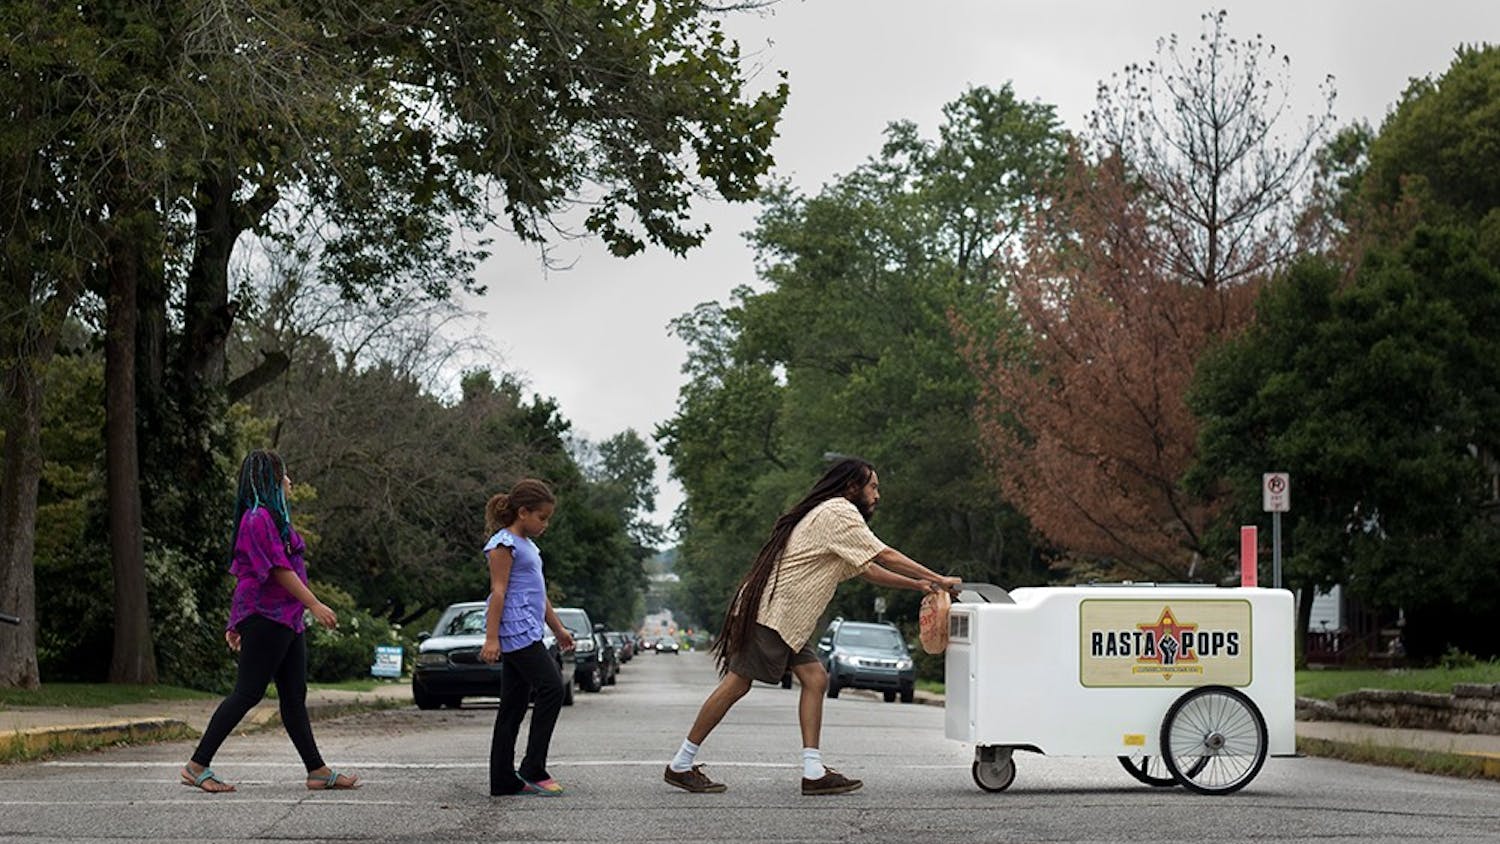 Iuri Santos pushes the Rasta Pops cart toward downtown Bloomington with his daughter Zara (left), 10, and her friend Jasmine following behind. Santos grew up in Brazil where he says vendors are on almost every street selling ice pops from coolers strapped to their necks, it was those memories that inspired him and his wife to start this business in Bloomington. 